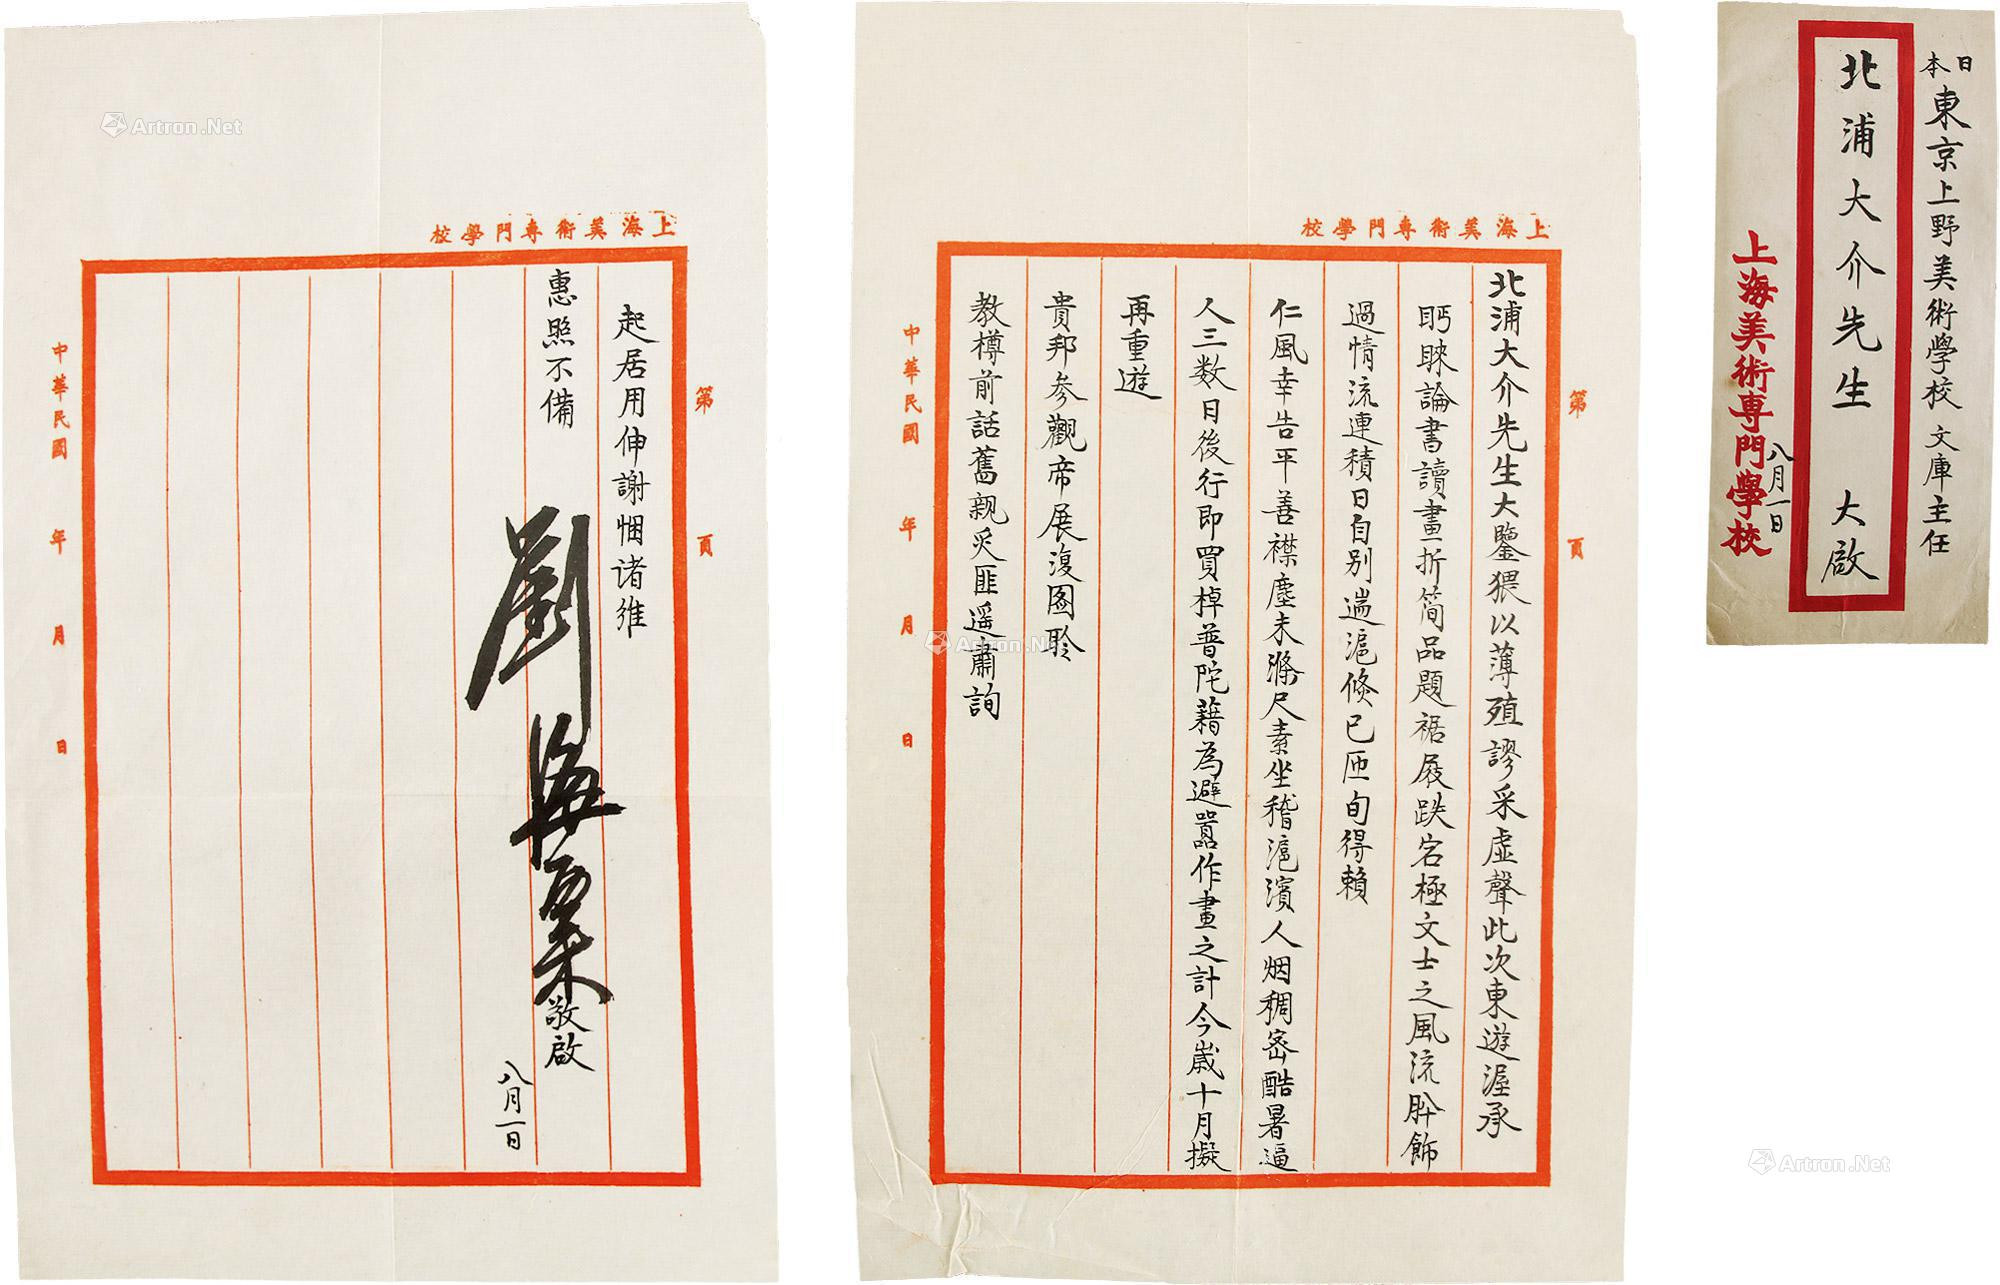 Letter of two pages autographed by liu Haisu， with original covers